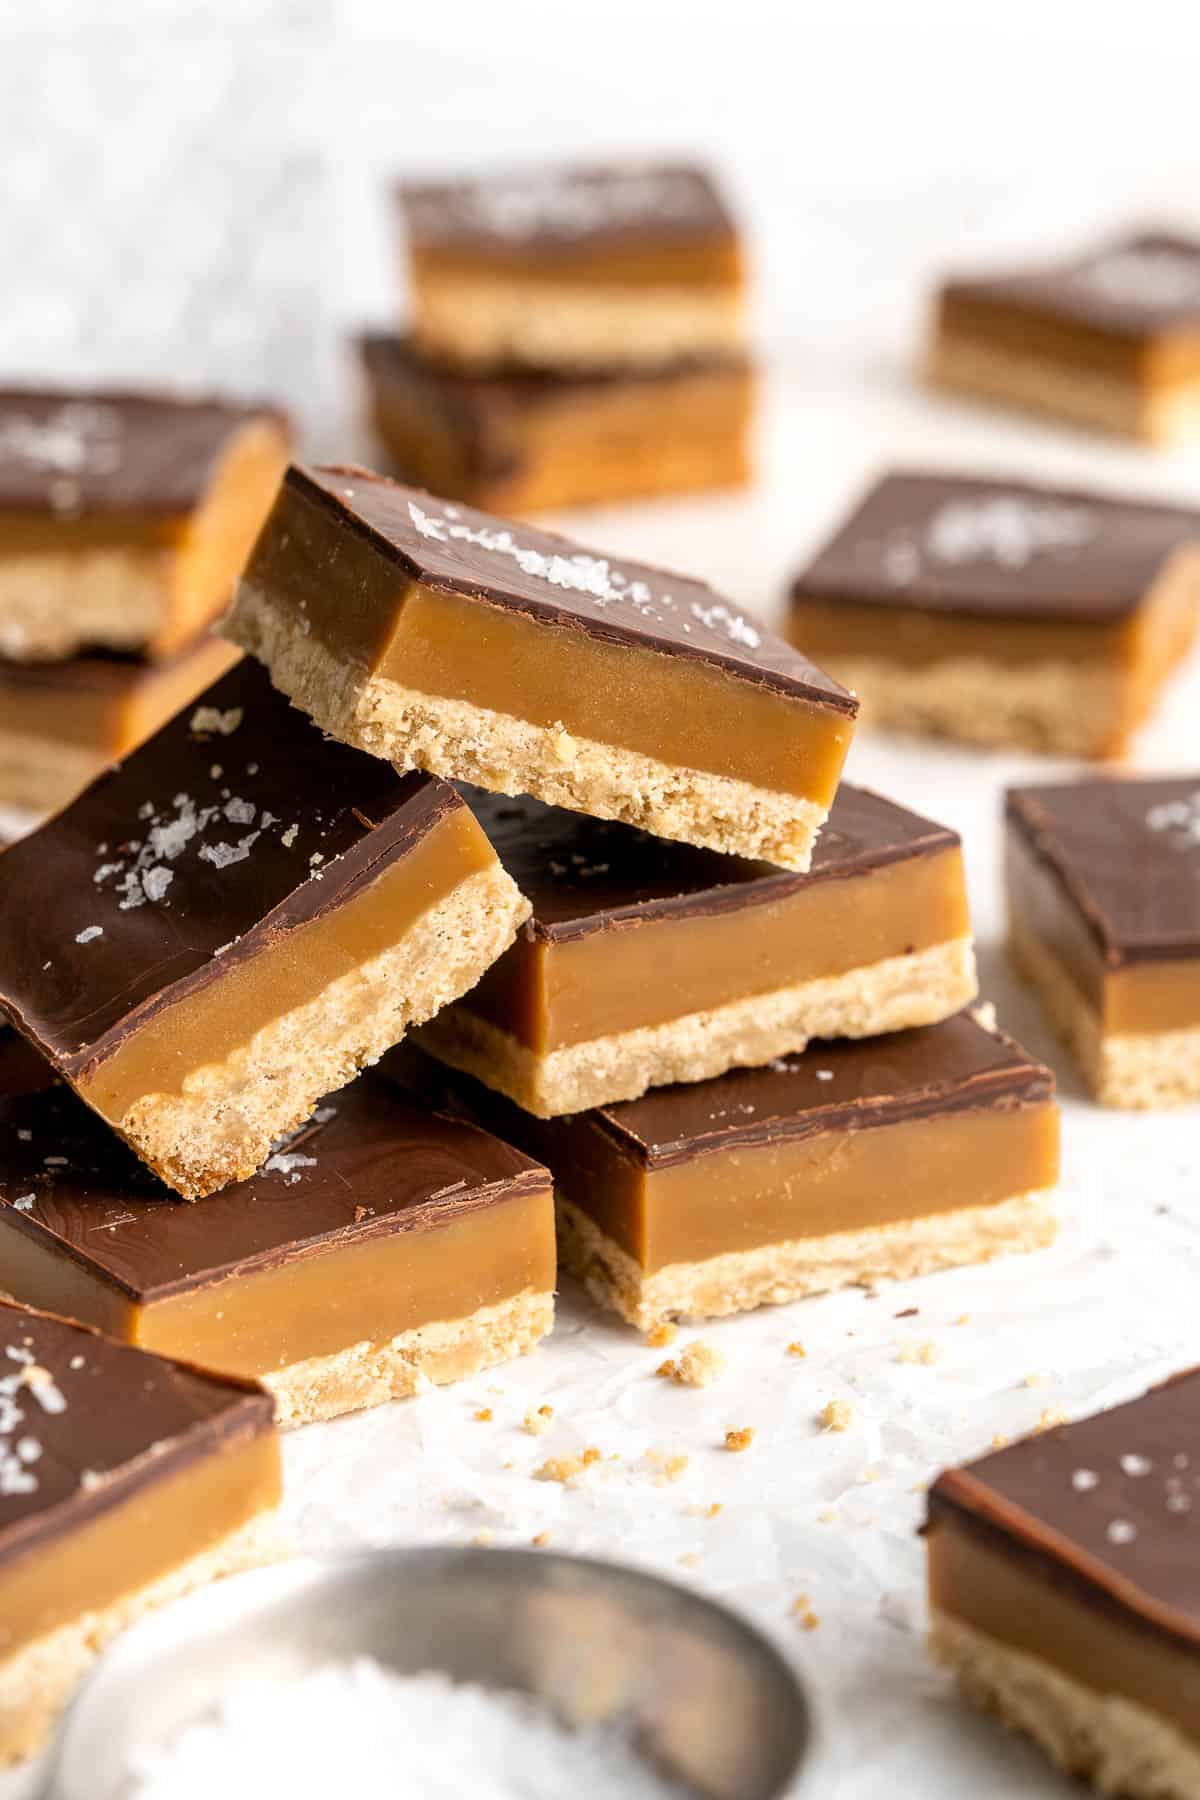 Millionaire's Shortbread are a triple-layered treat of buttery shortbread, homemade caramel, and chocolate for the perfect balance of textures and flavors. | aheadofthyme.com